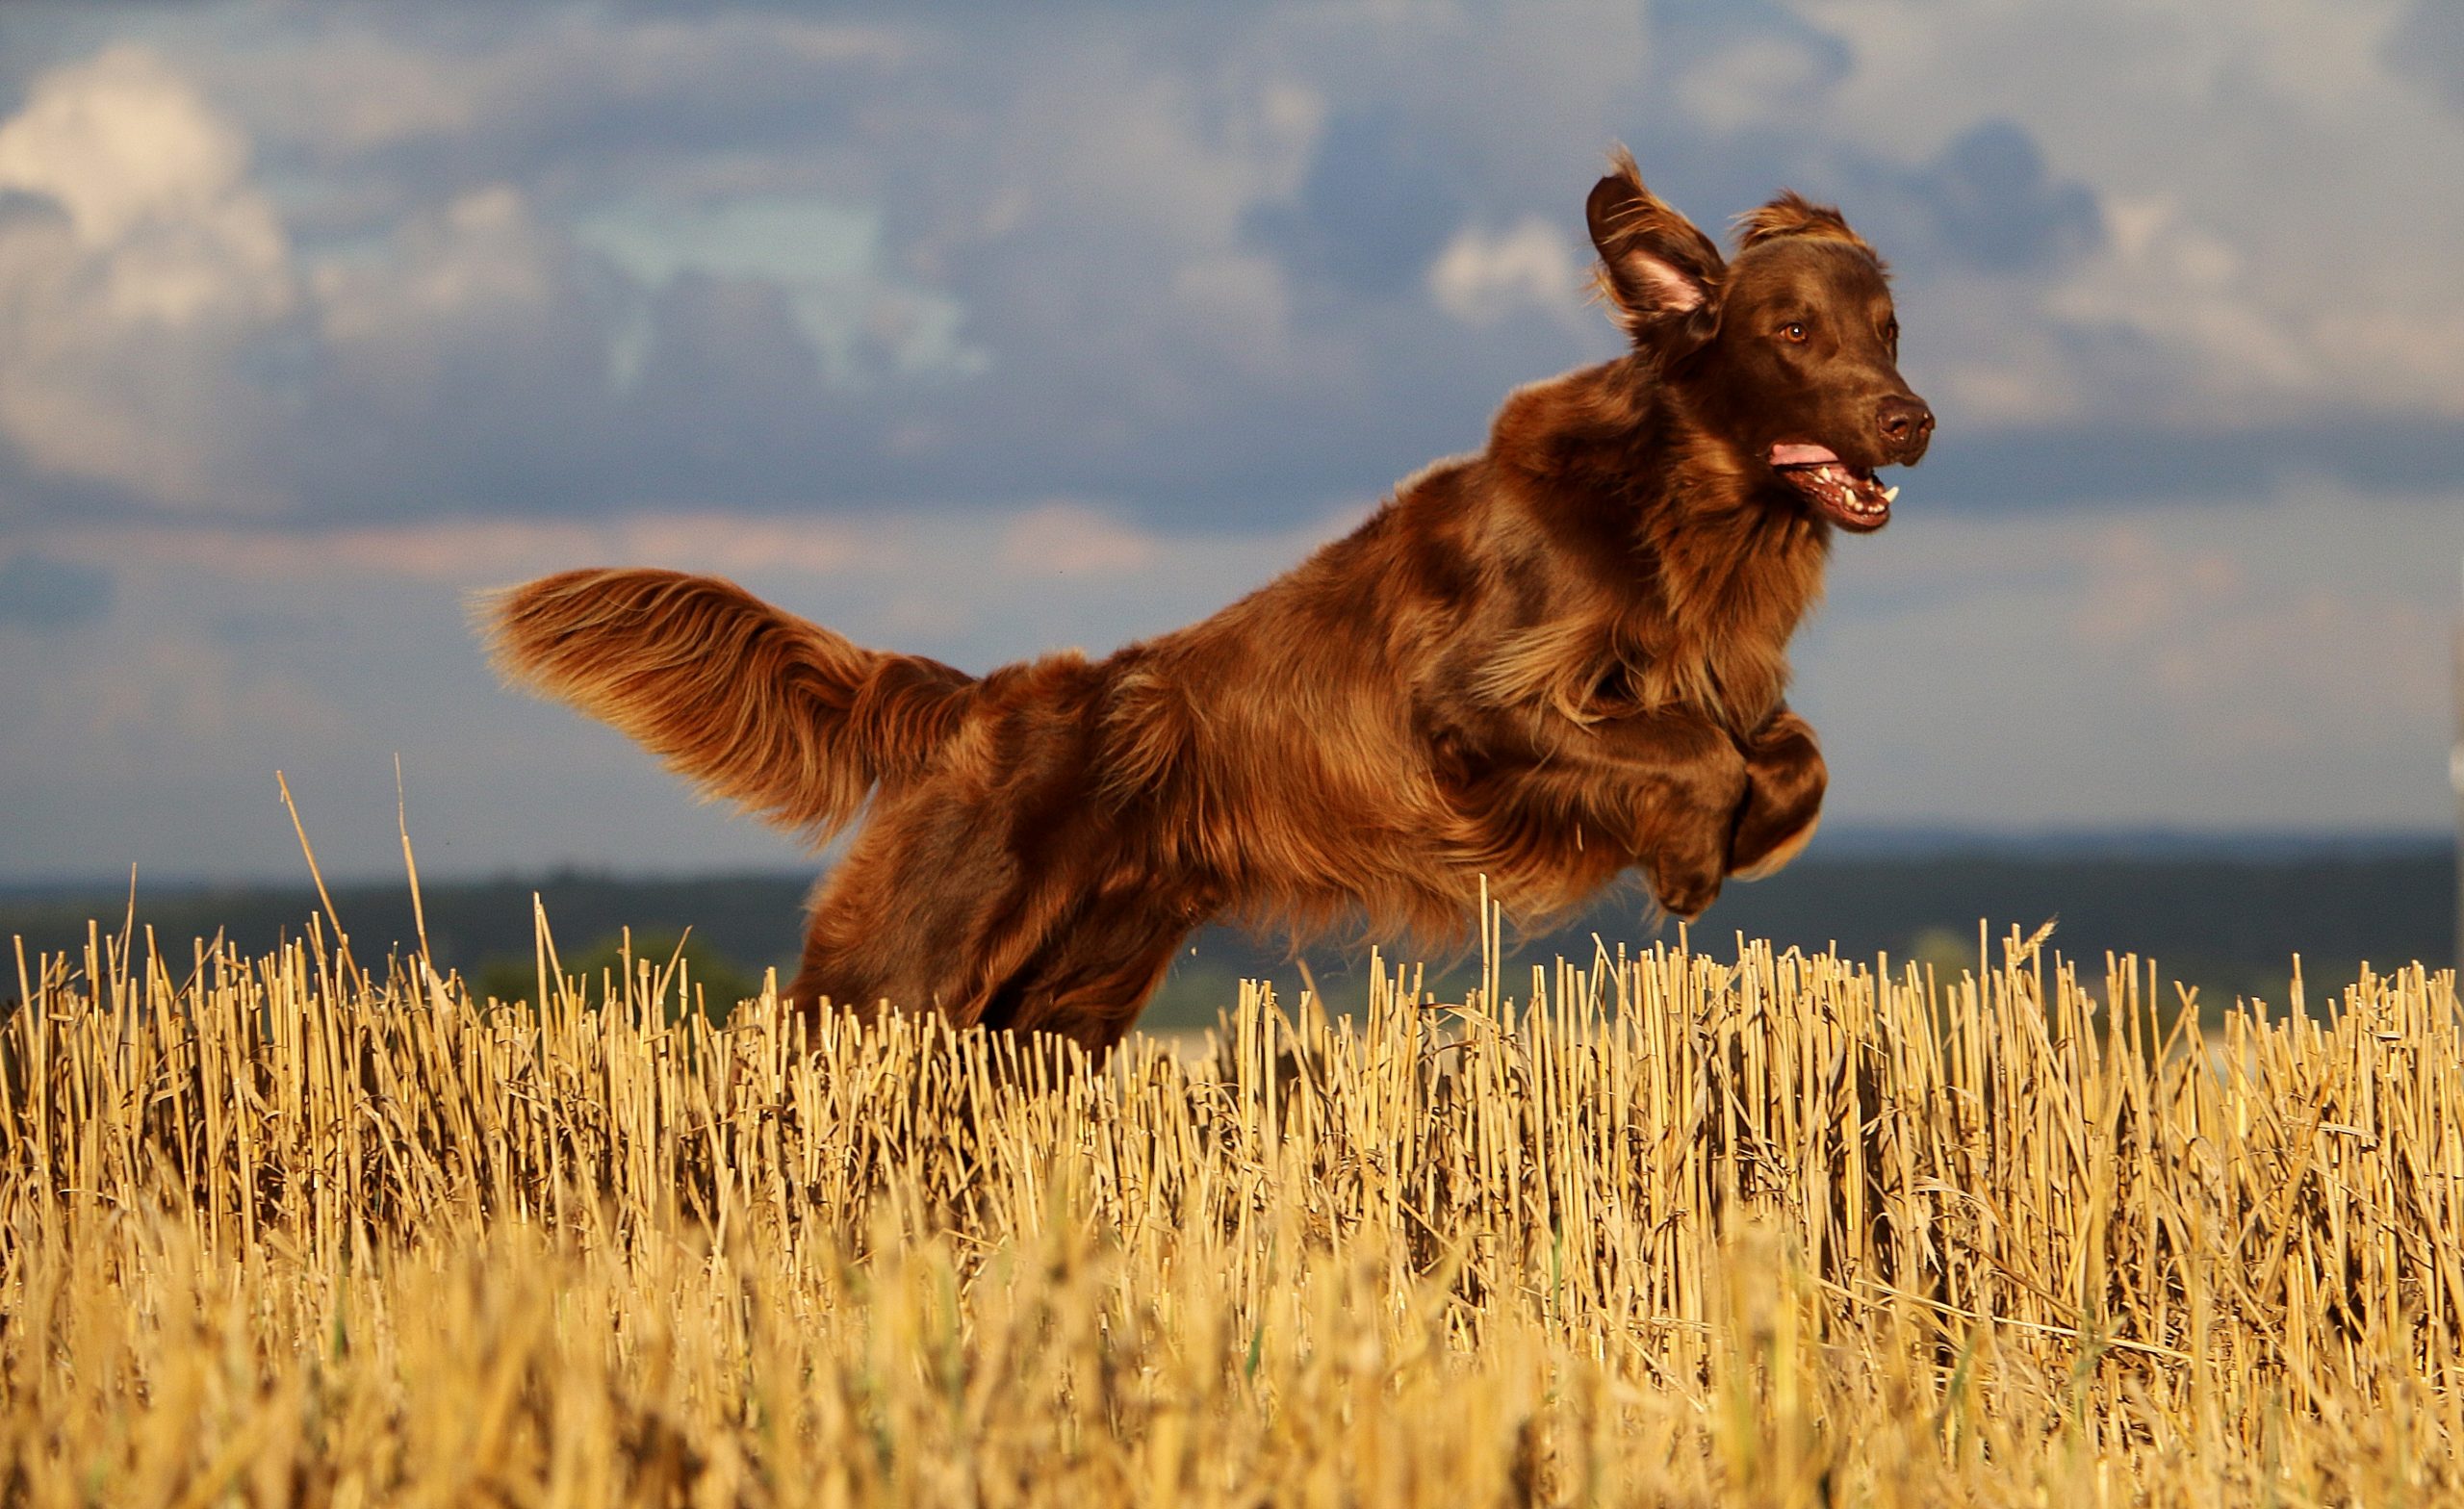 Flat,Coated,Retriever,Is,Jumping,On,A,Stubble,Field,In